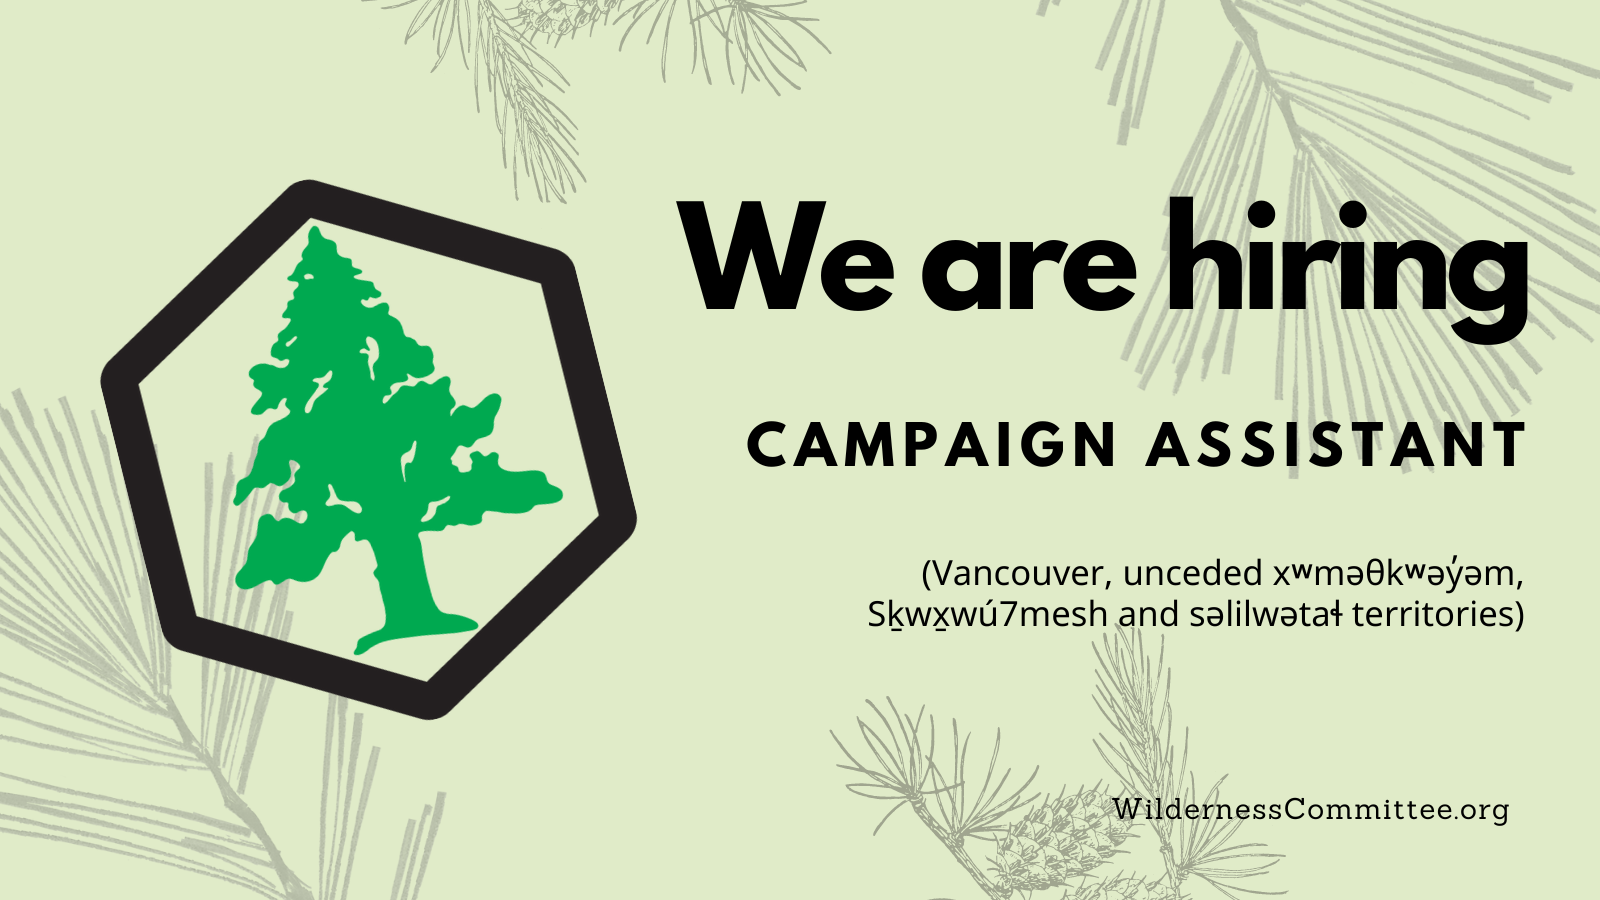 The logo of the Wilderness Committee. Text on the image says "we are hiring. campaign assistant." End of image description. 